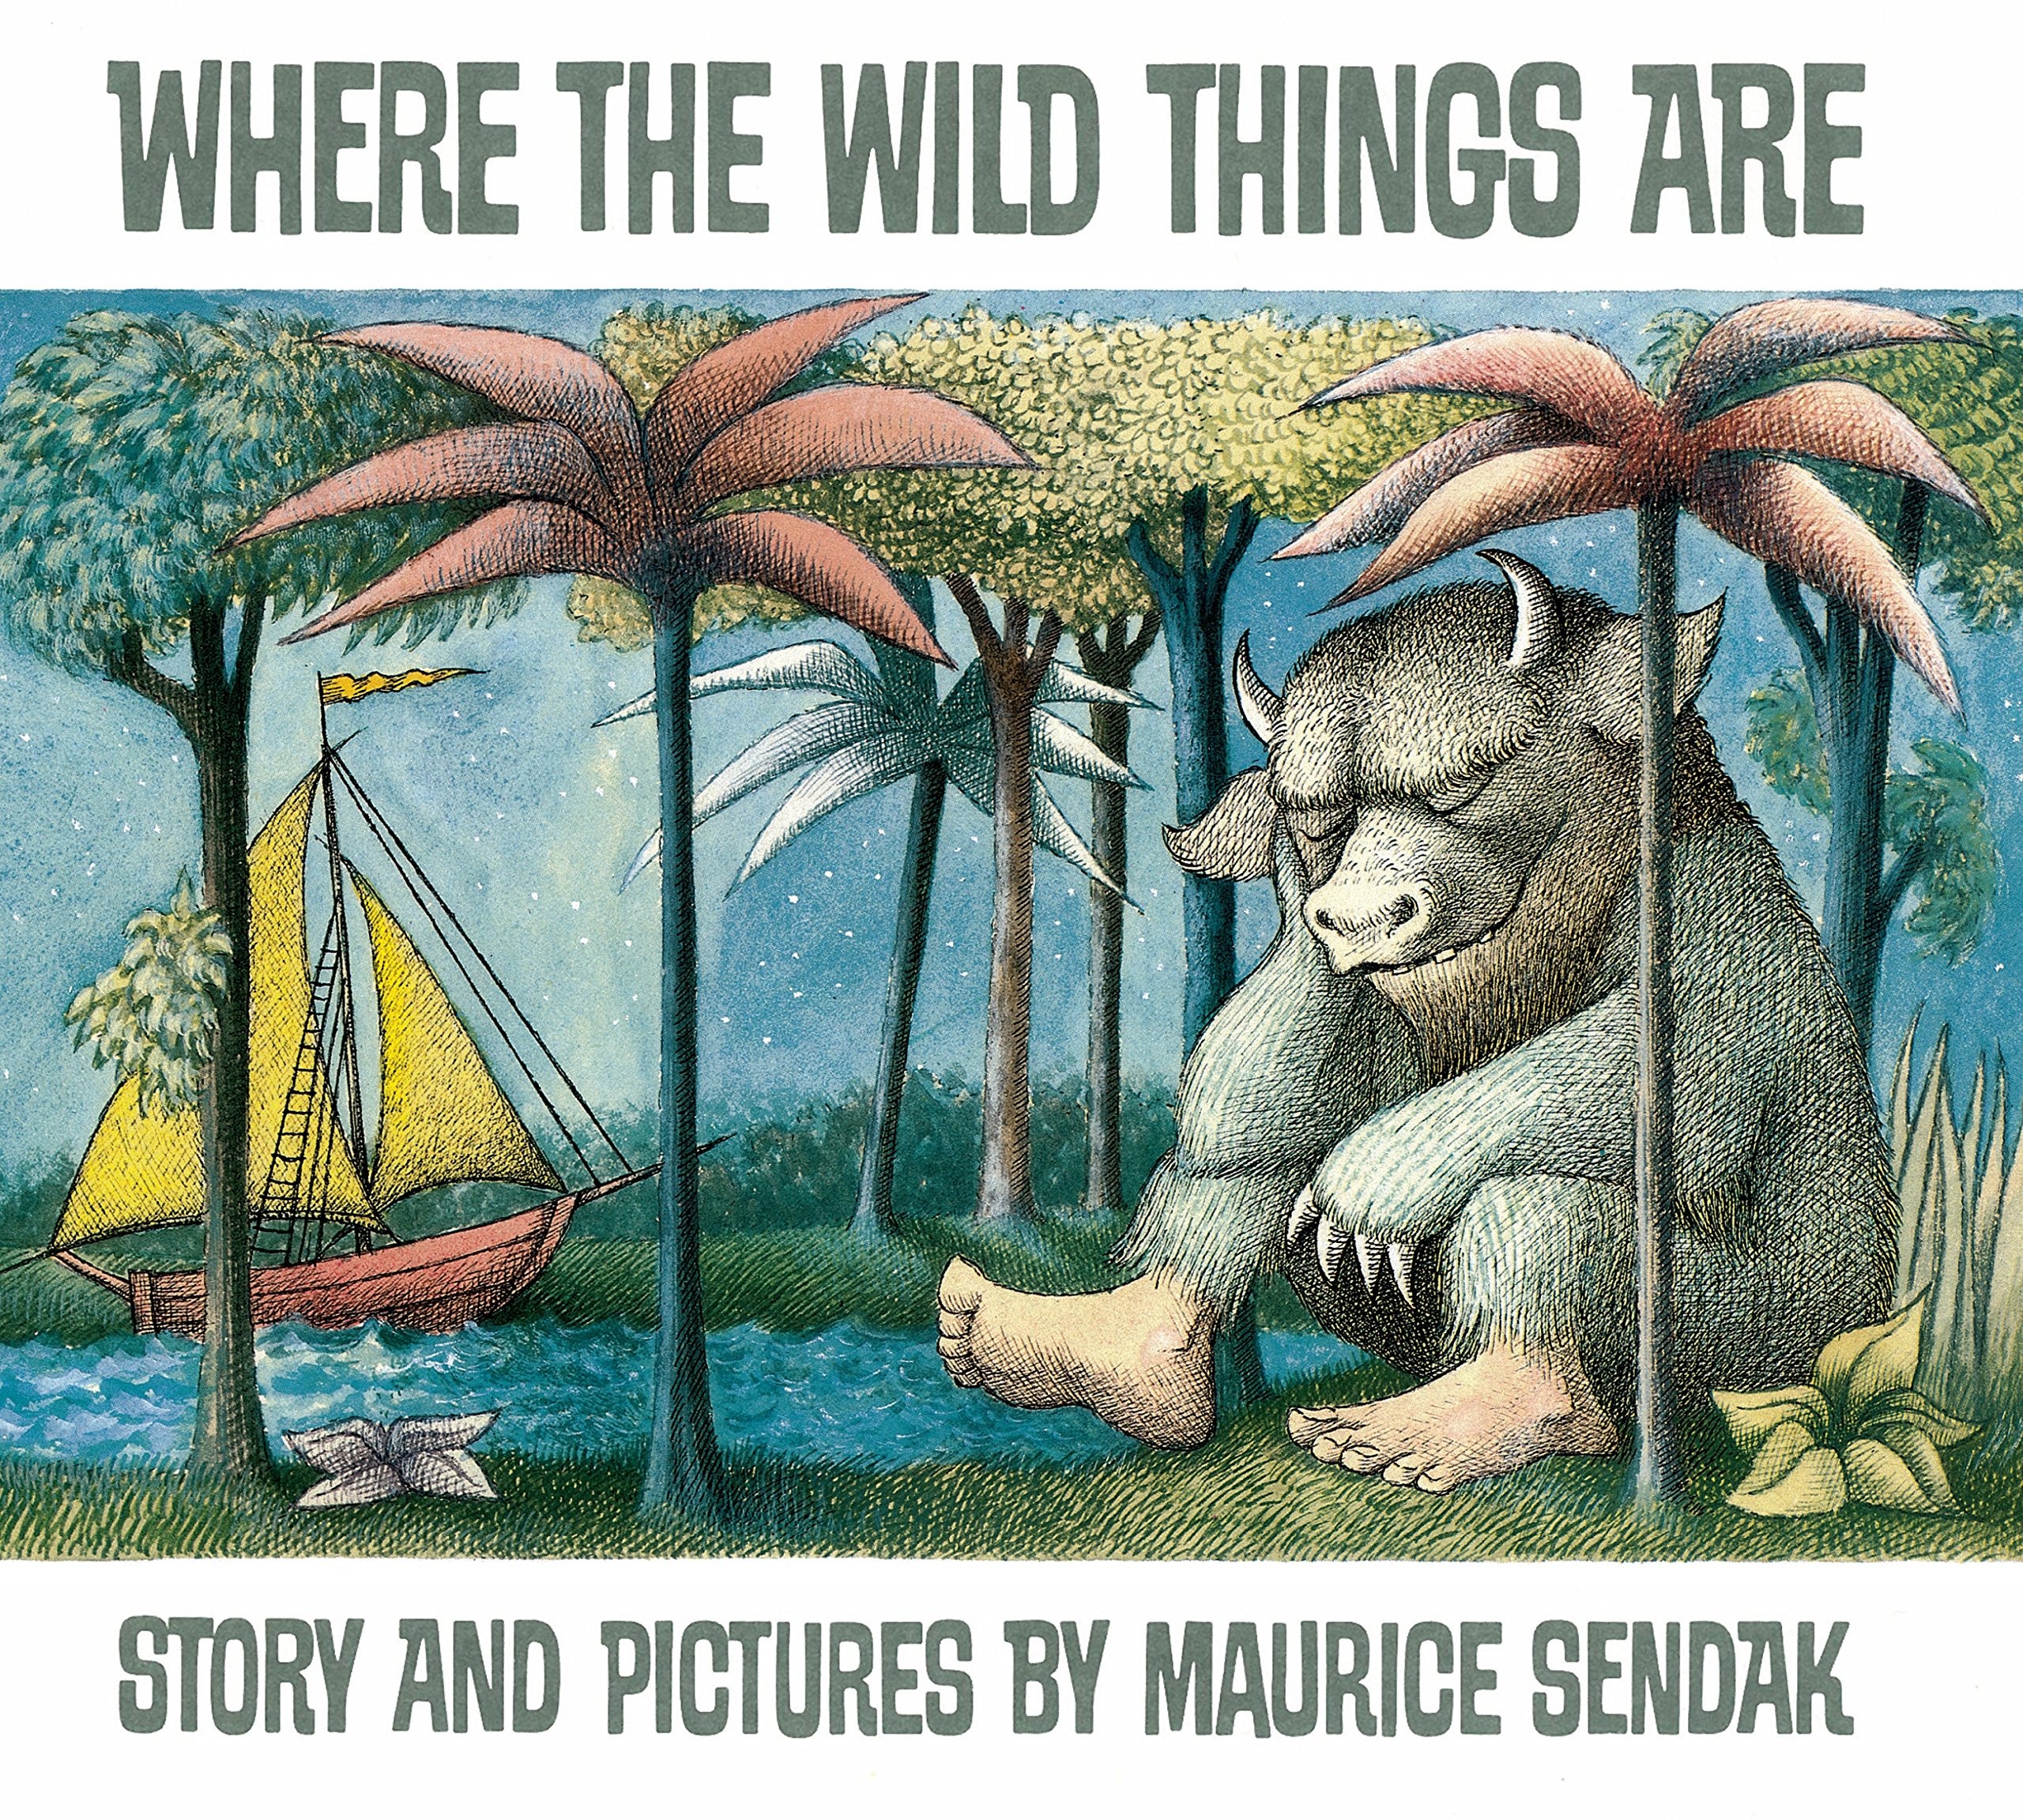 1. 'Where the Wild Things Are'